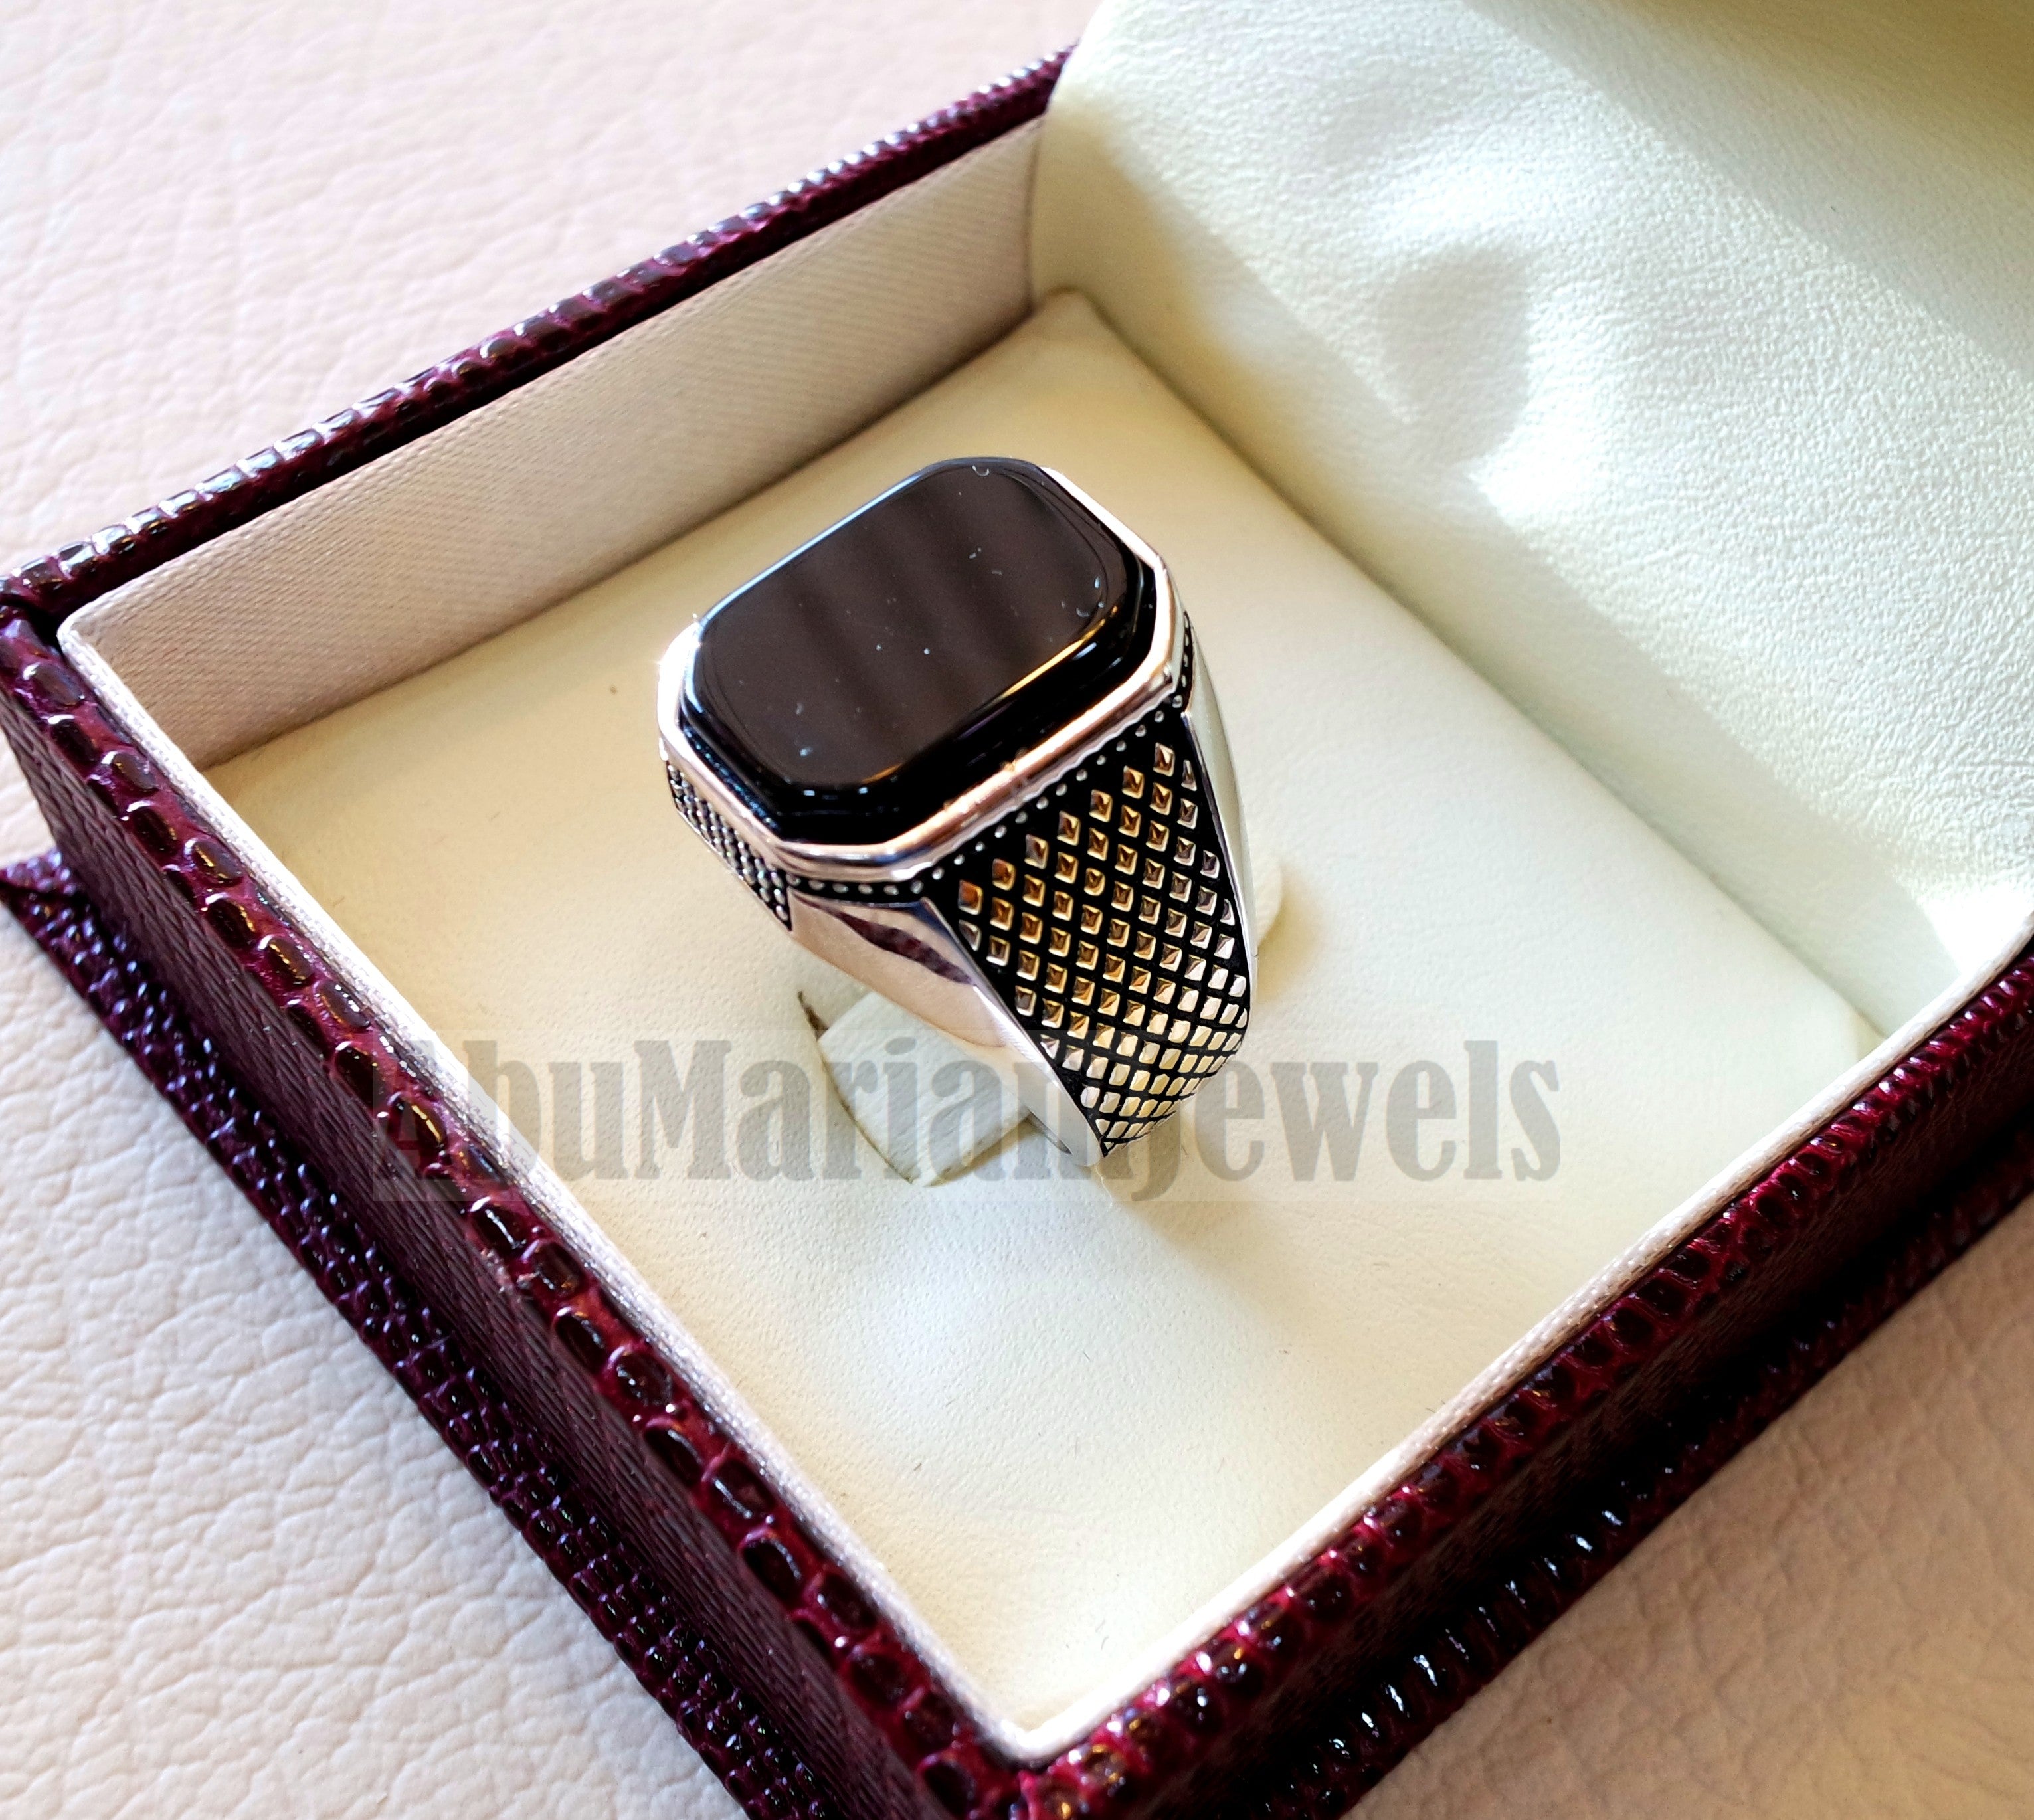 cushion rectangular octagon black onyx agate aqeeq man ring sterling silver 925 and 14k gold plating natural stone gem all sizes jewelry